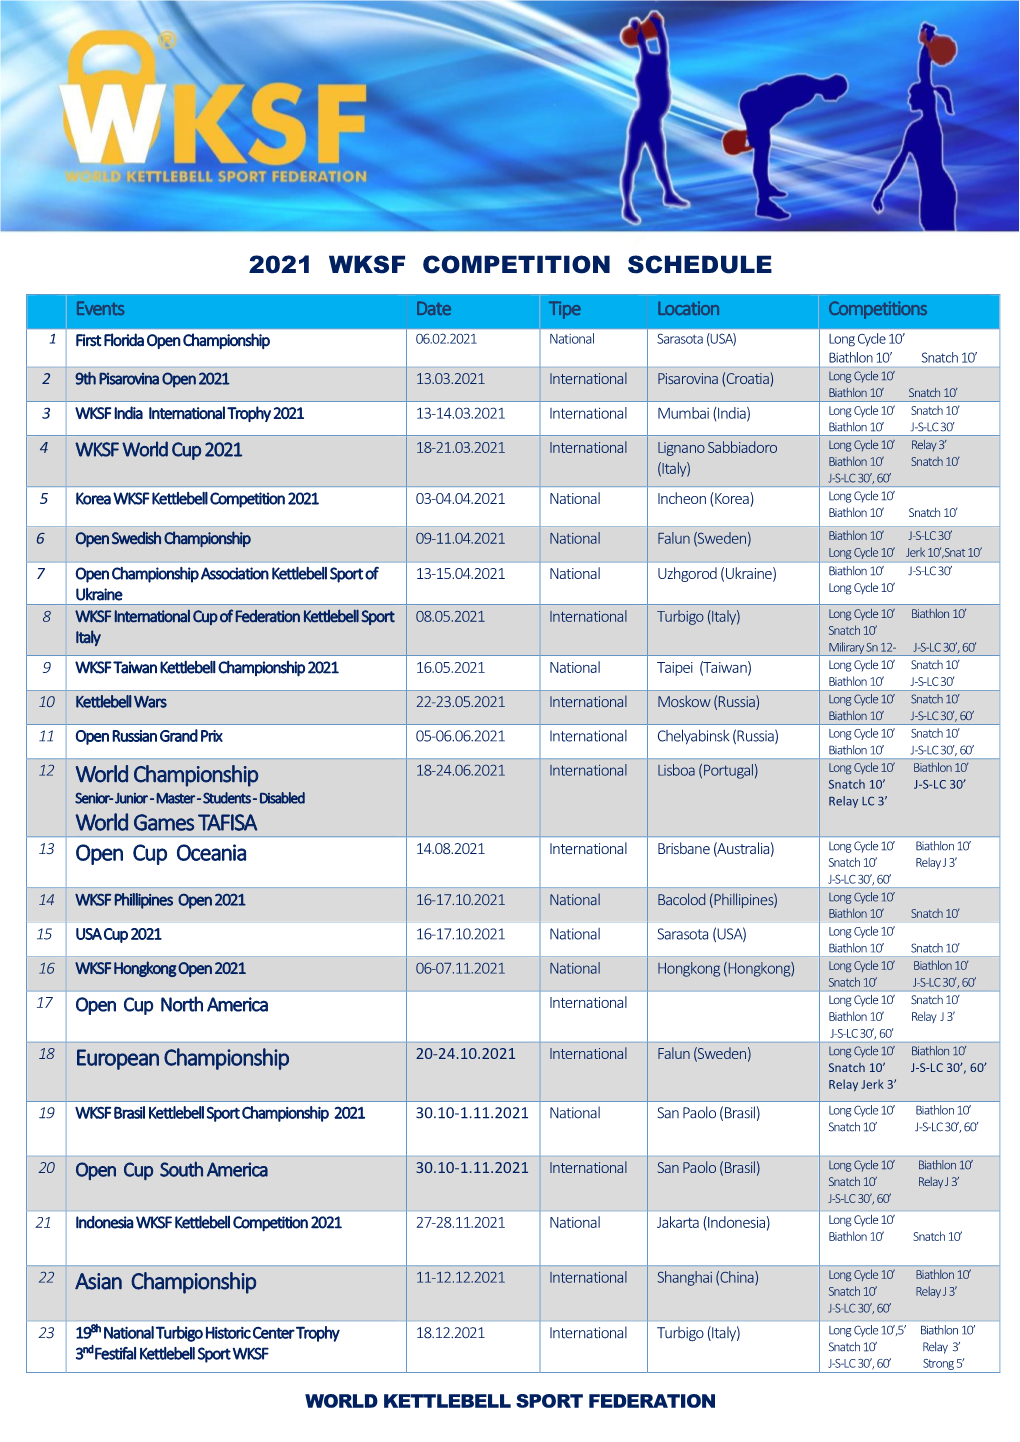 2021 WKSF COMPETITION SCHEDULE 12 World Championship World Games TAFISA 13 Open Cup Oceania 18 European Championship 22 A